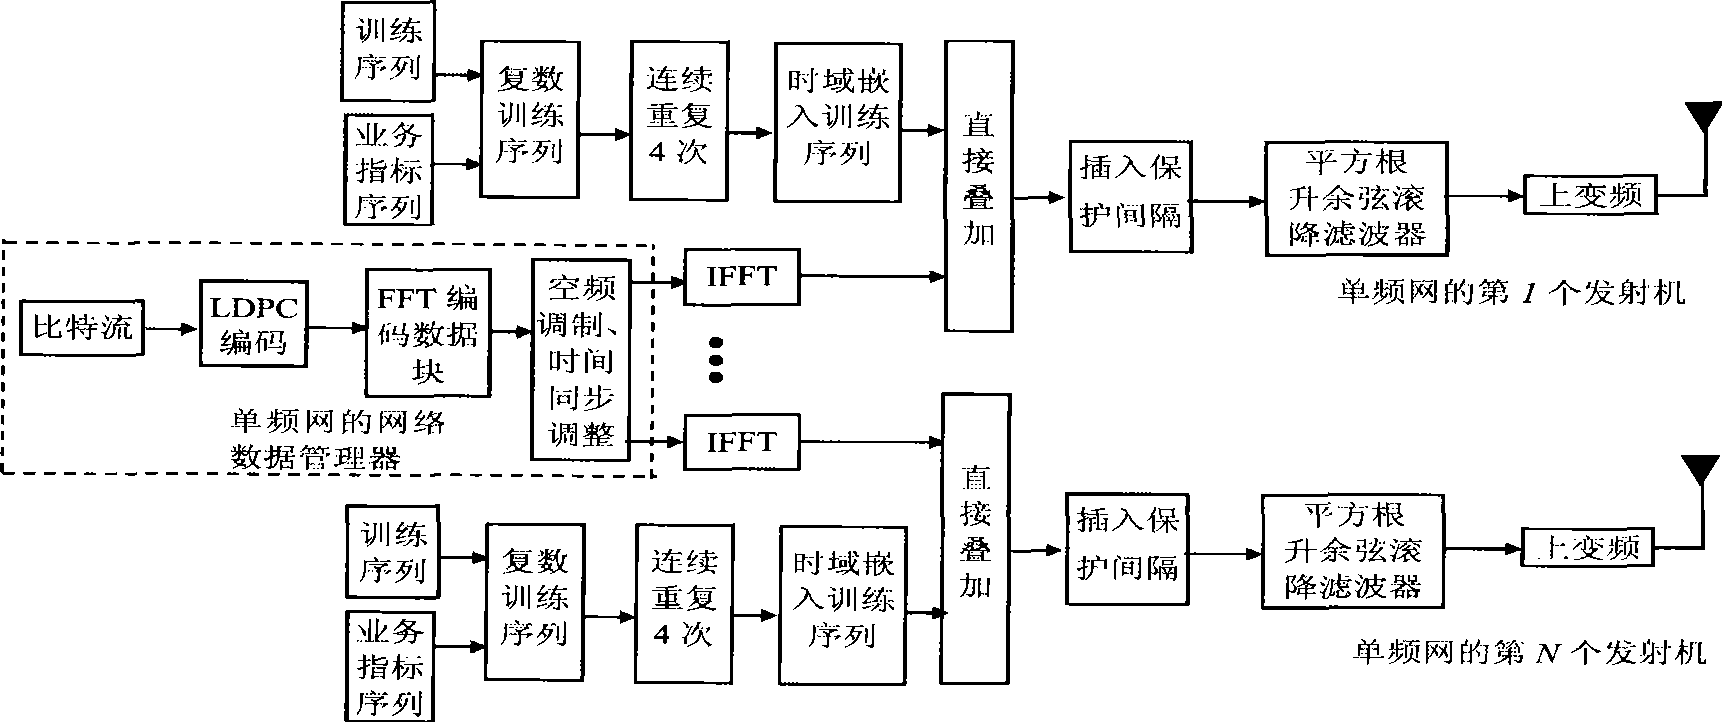 Space-frequency modulation method for anti-interference digital television ground broadcasting transmitter